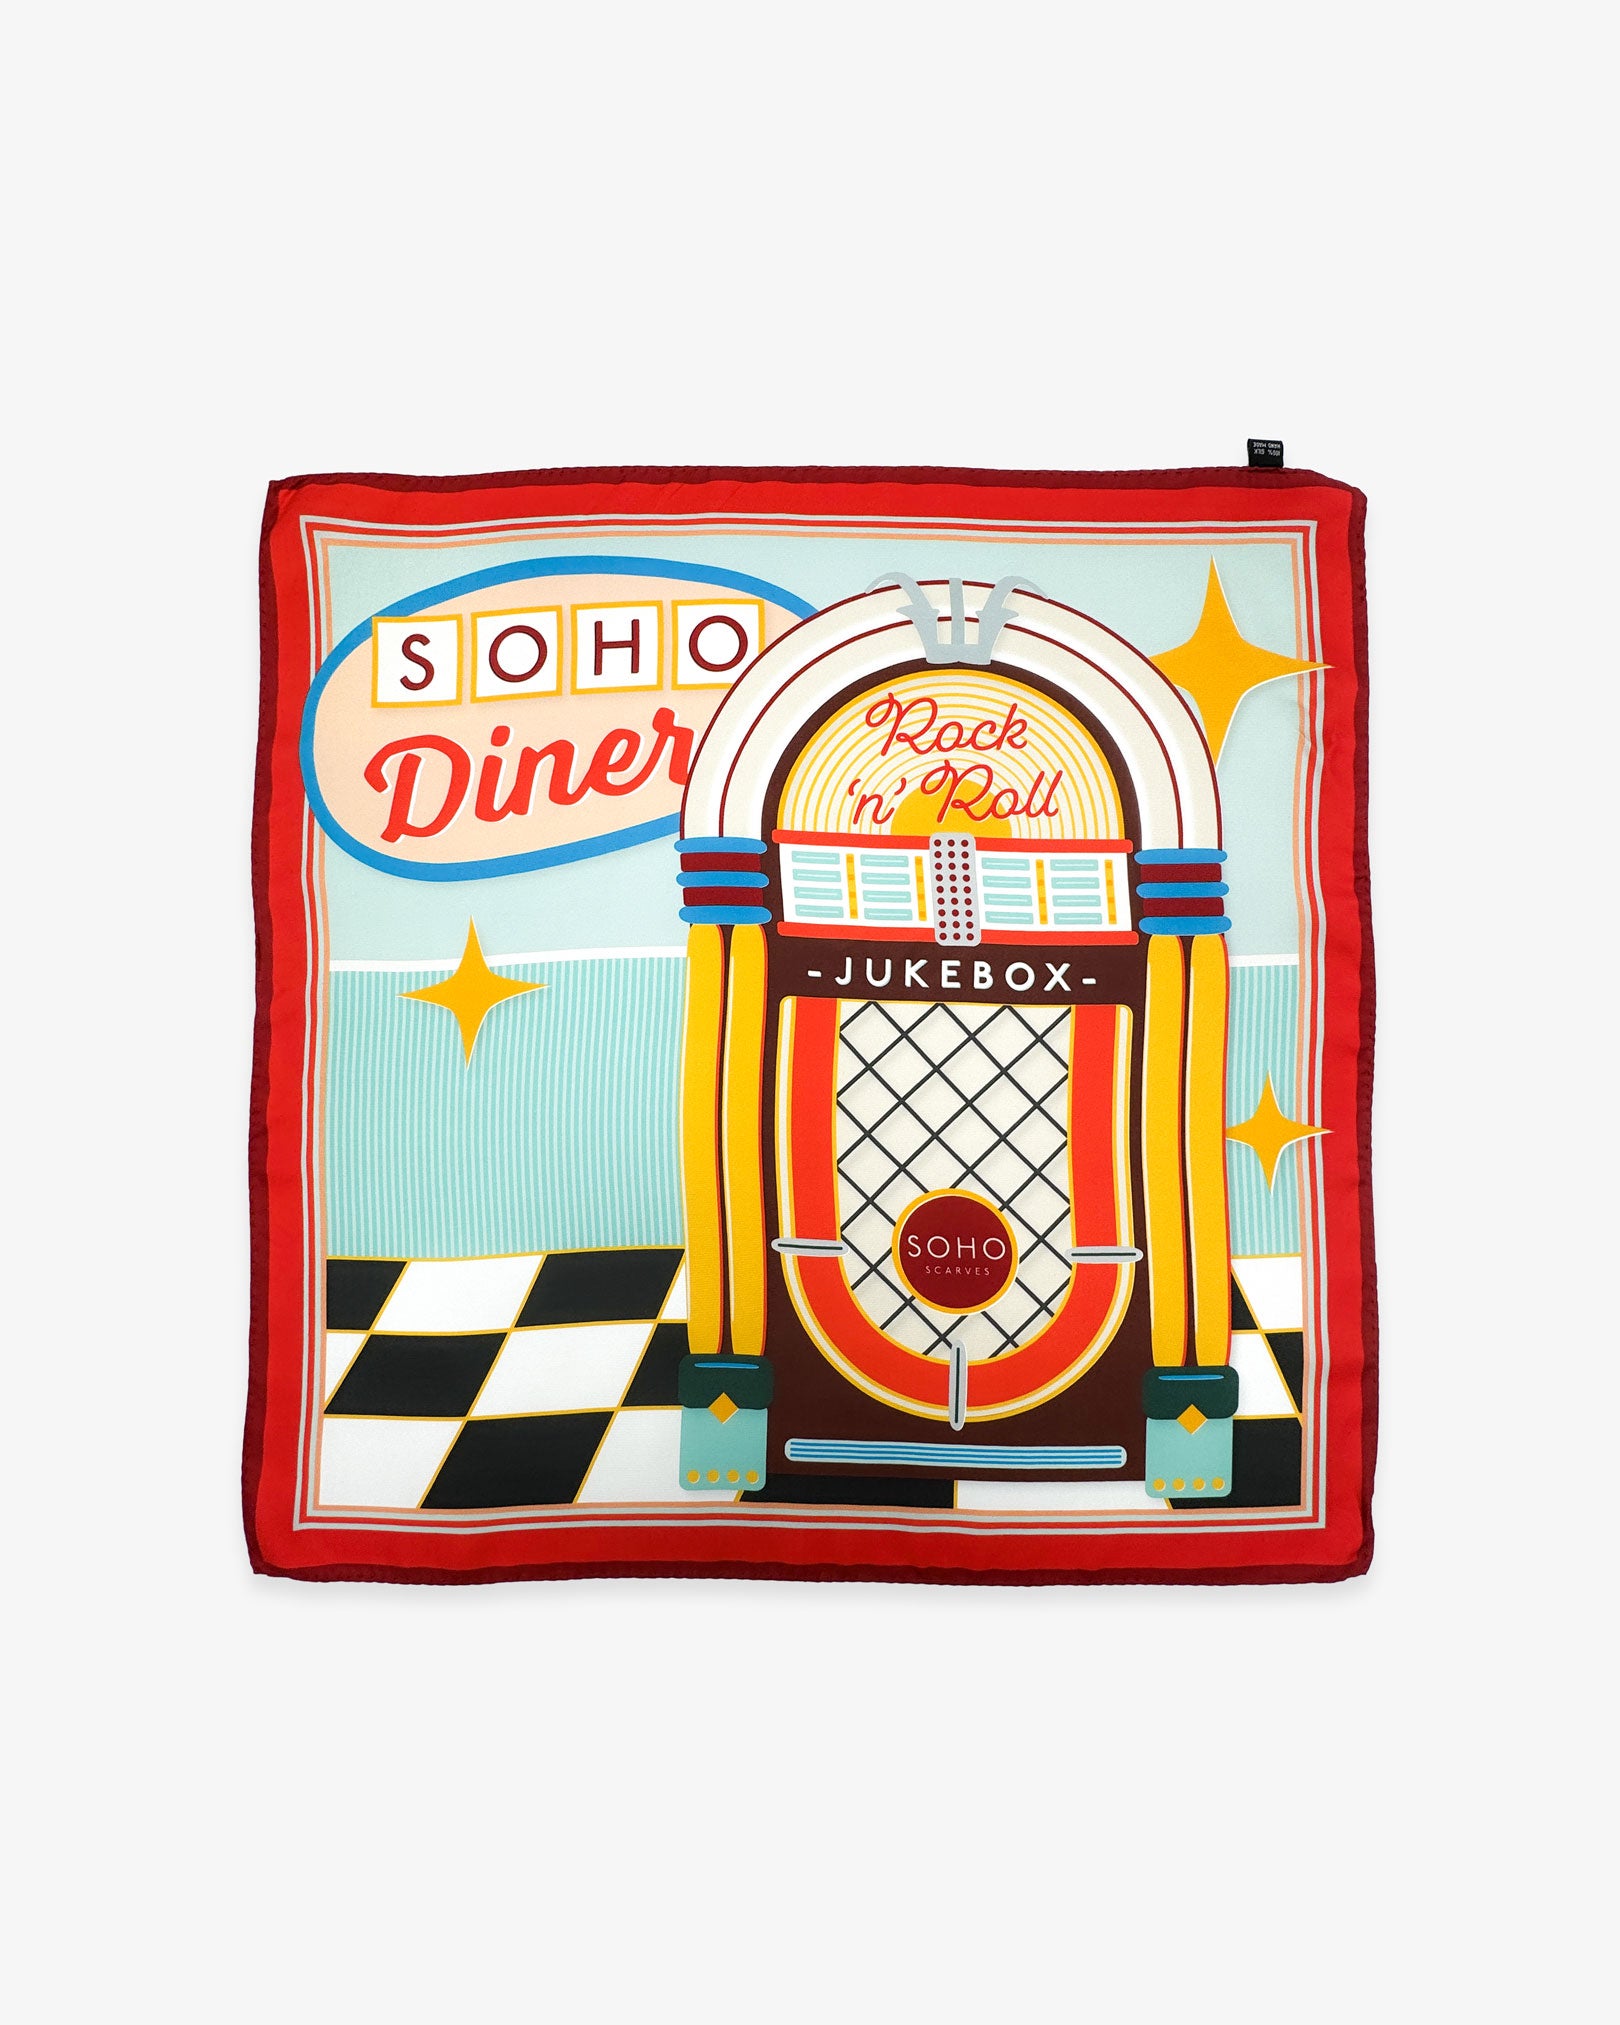 Fully unfolded 'Jukebox 2' silk pocket square, showing the 1950's jukebox, chequered floor and retro 'SOHO Diner' signage design using a classic 1950's colour palette.